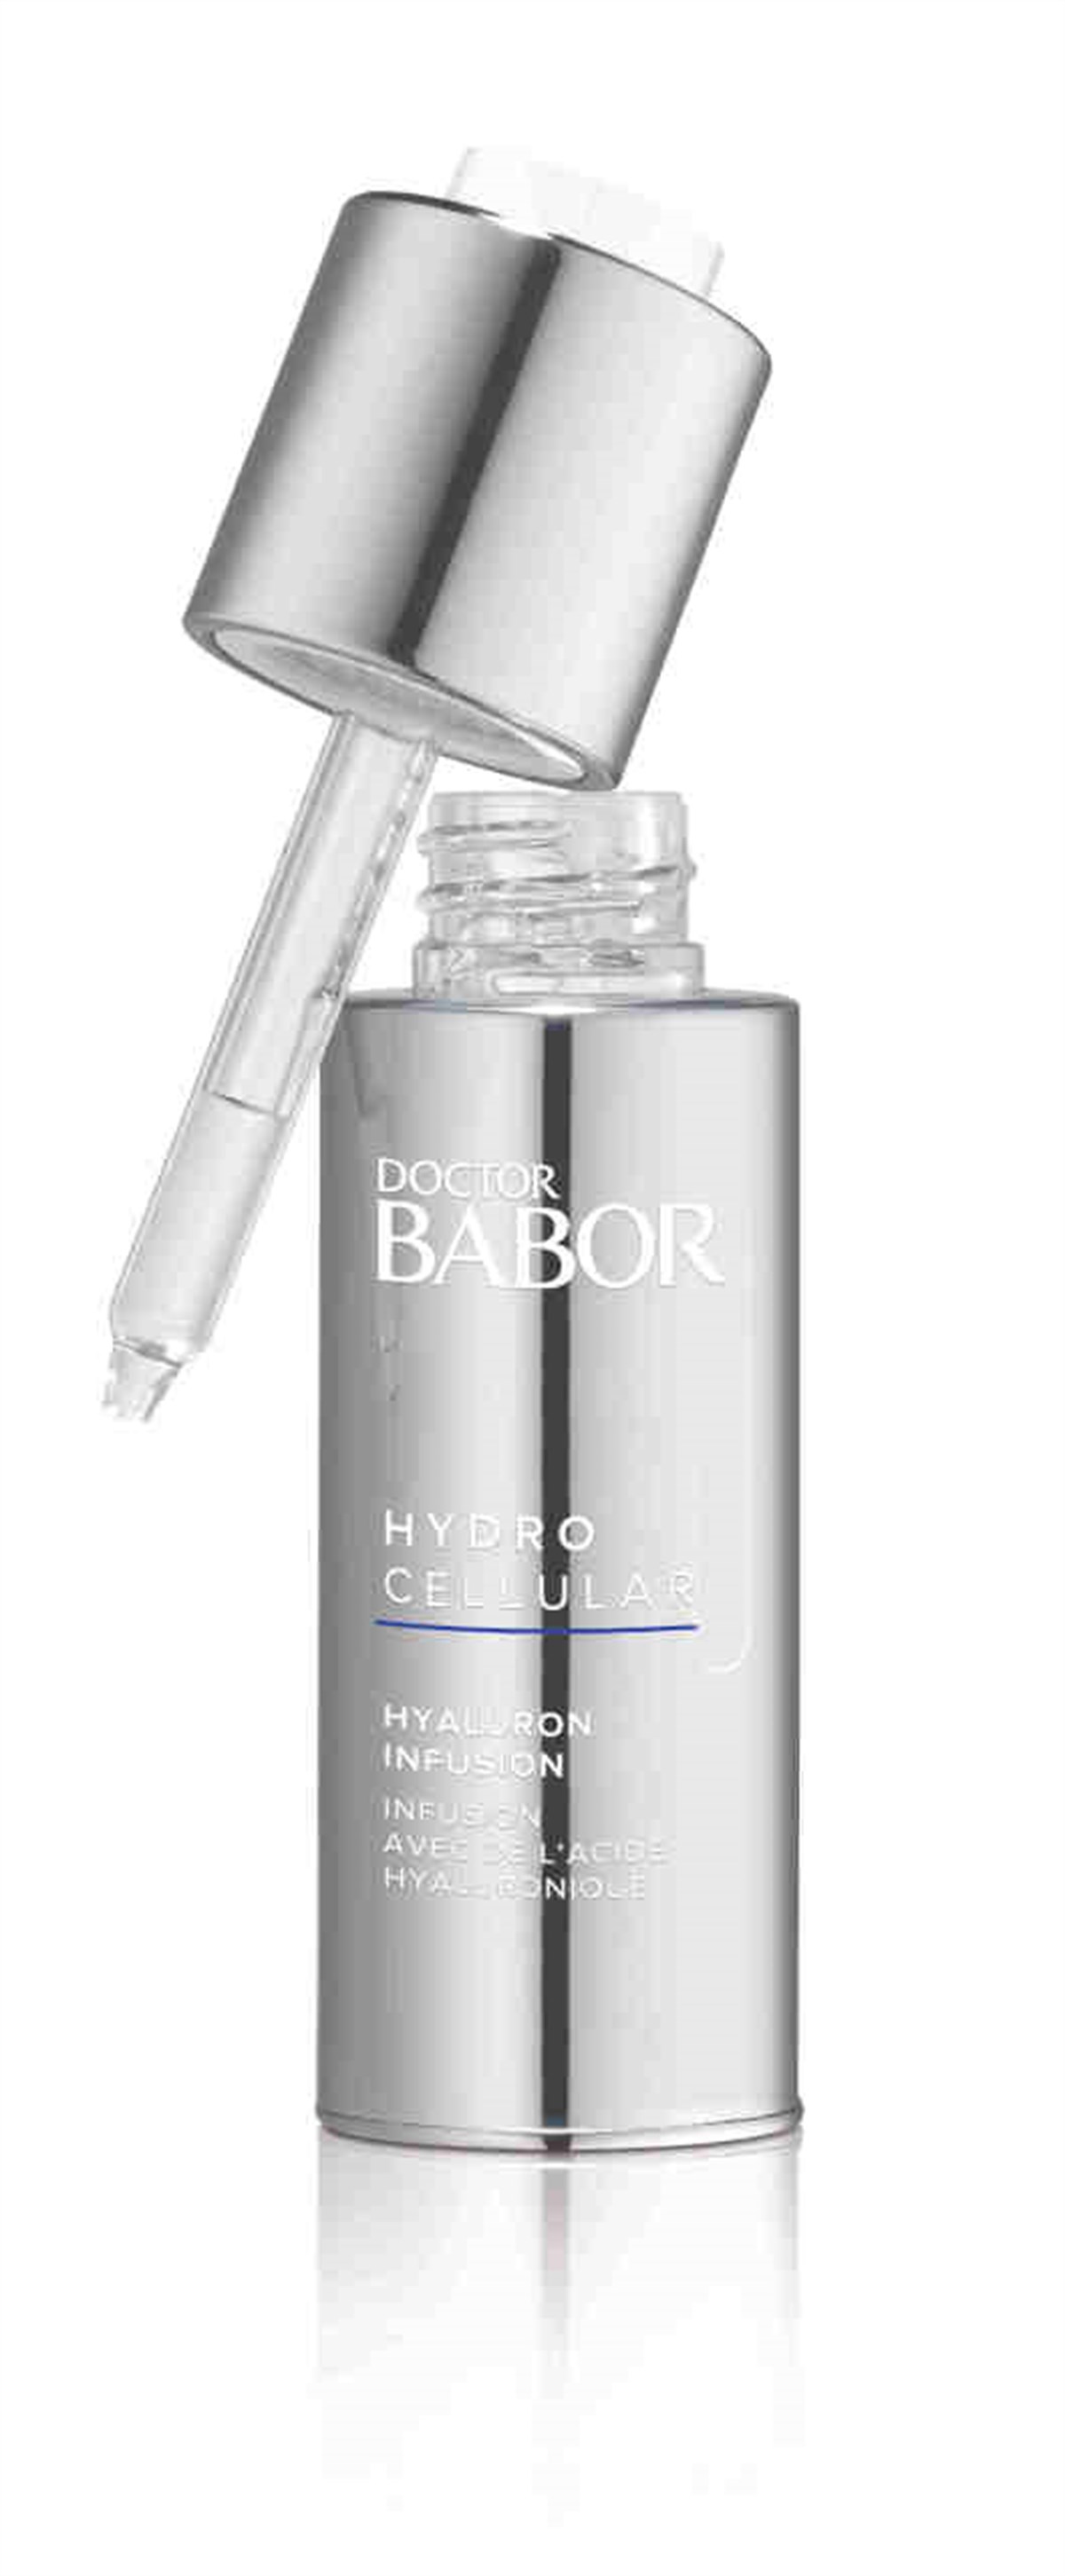 Doctor Babor Hydro Cellular Hyaluron Infusion Serum 30ml